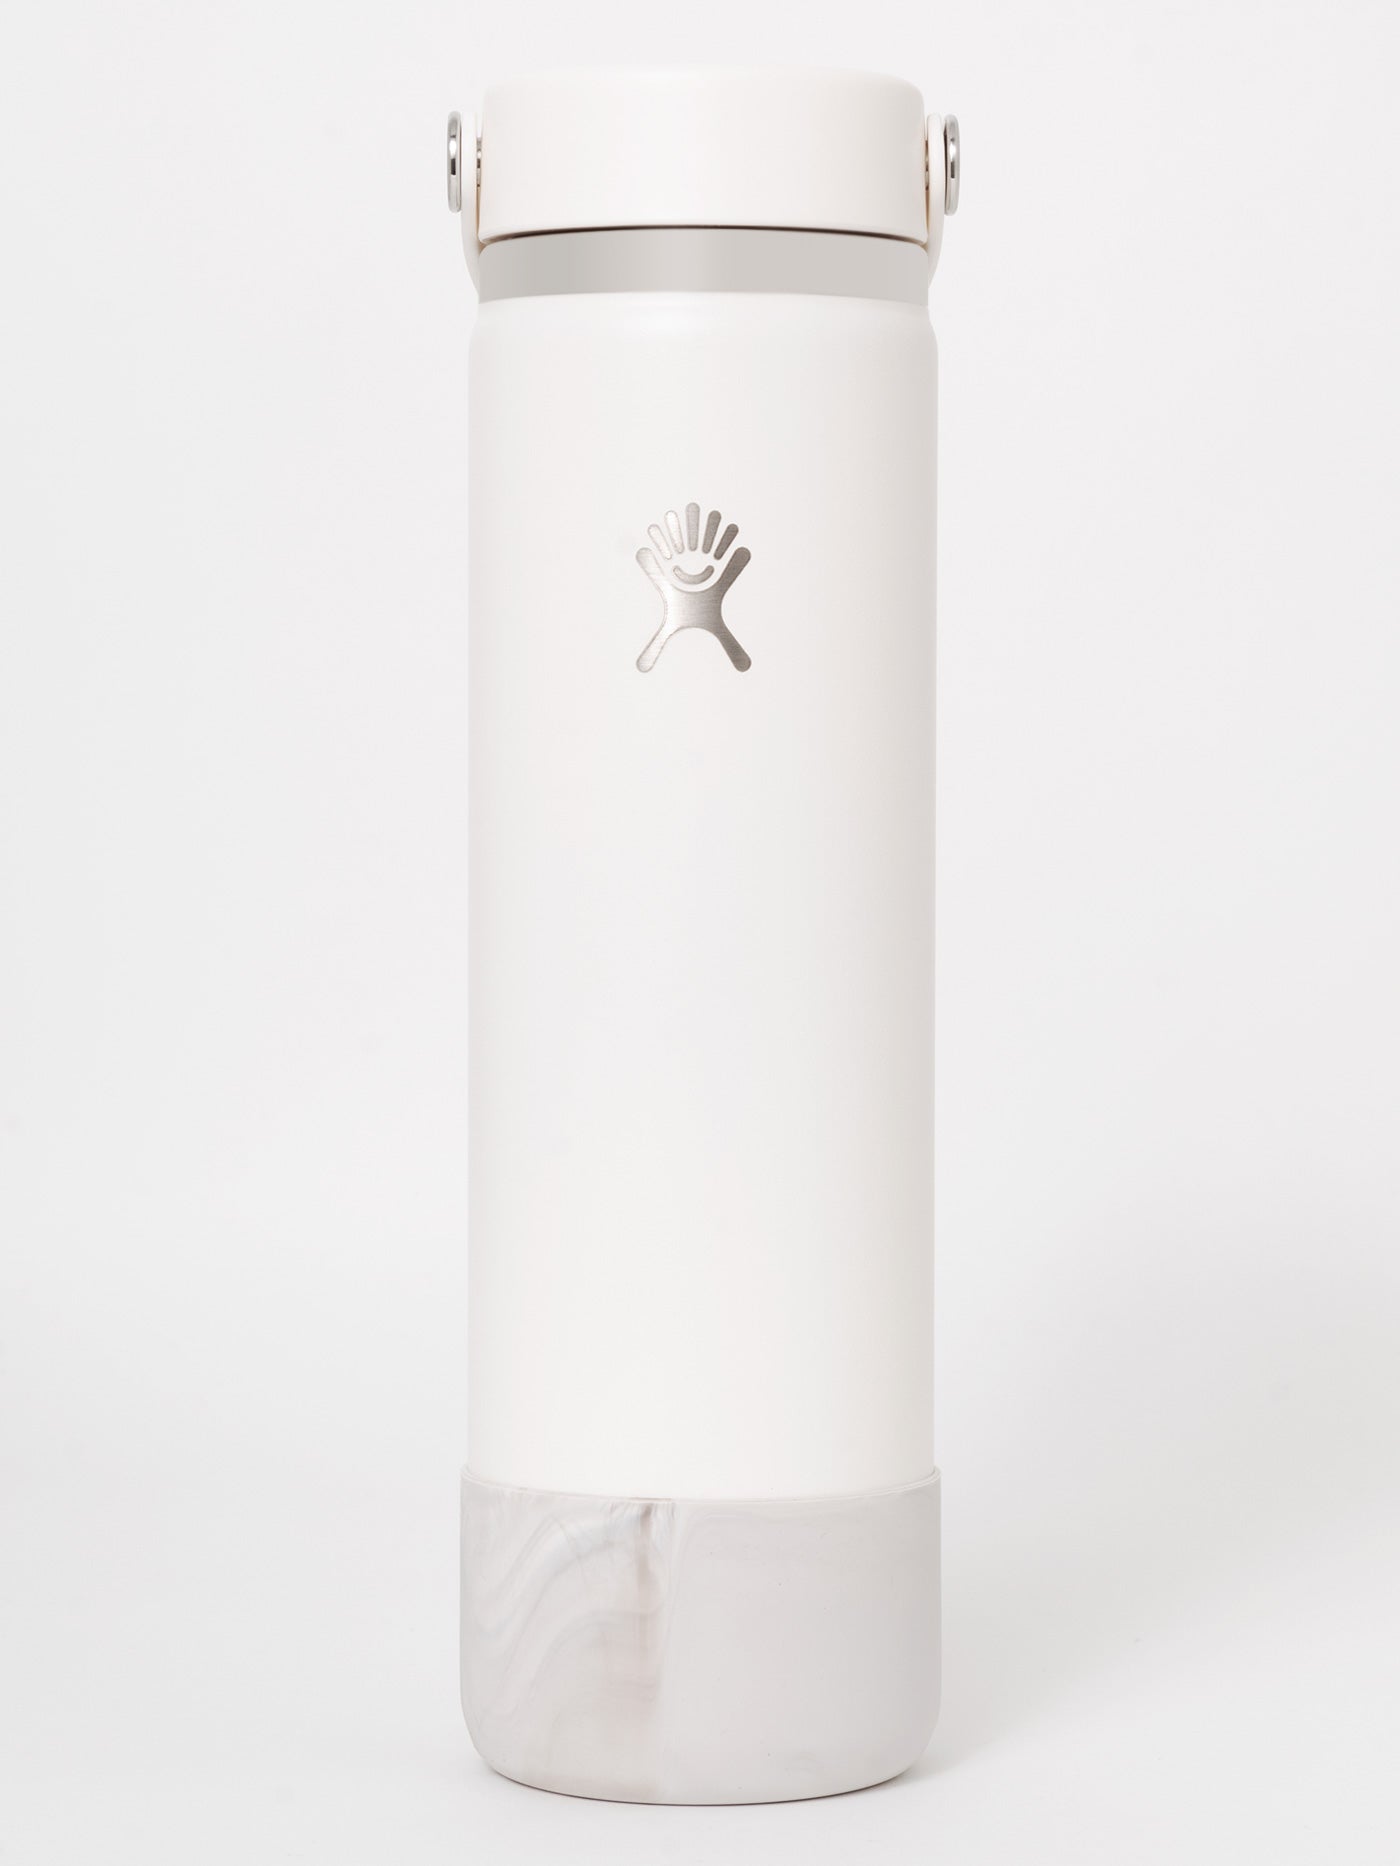 Hydro Flask Ebb & Flow Limited Edition Wide Mouth